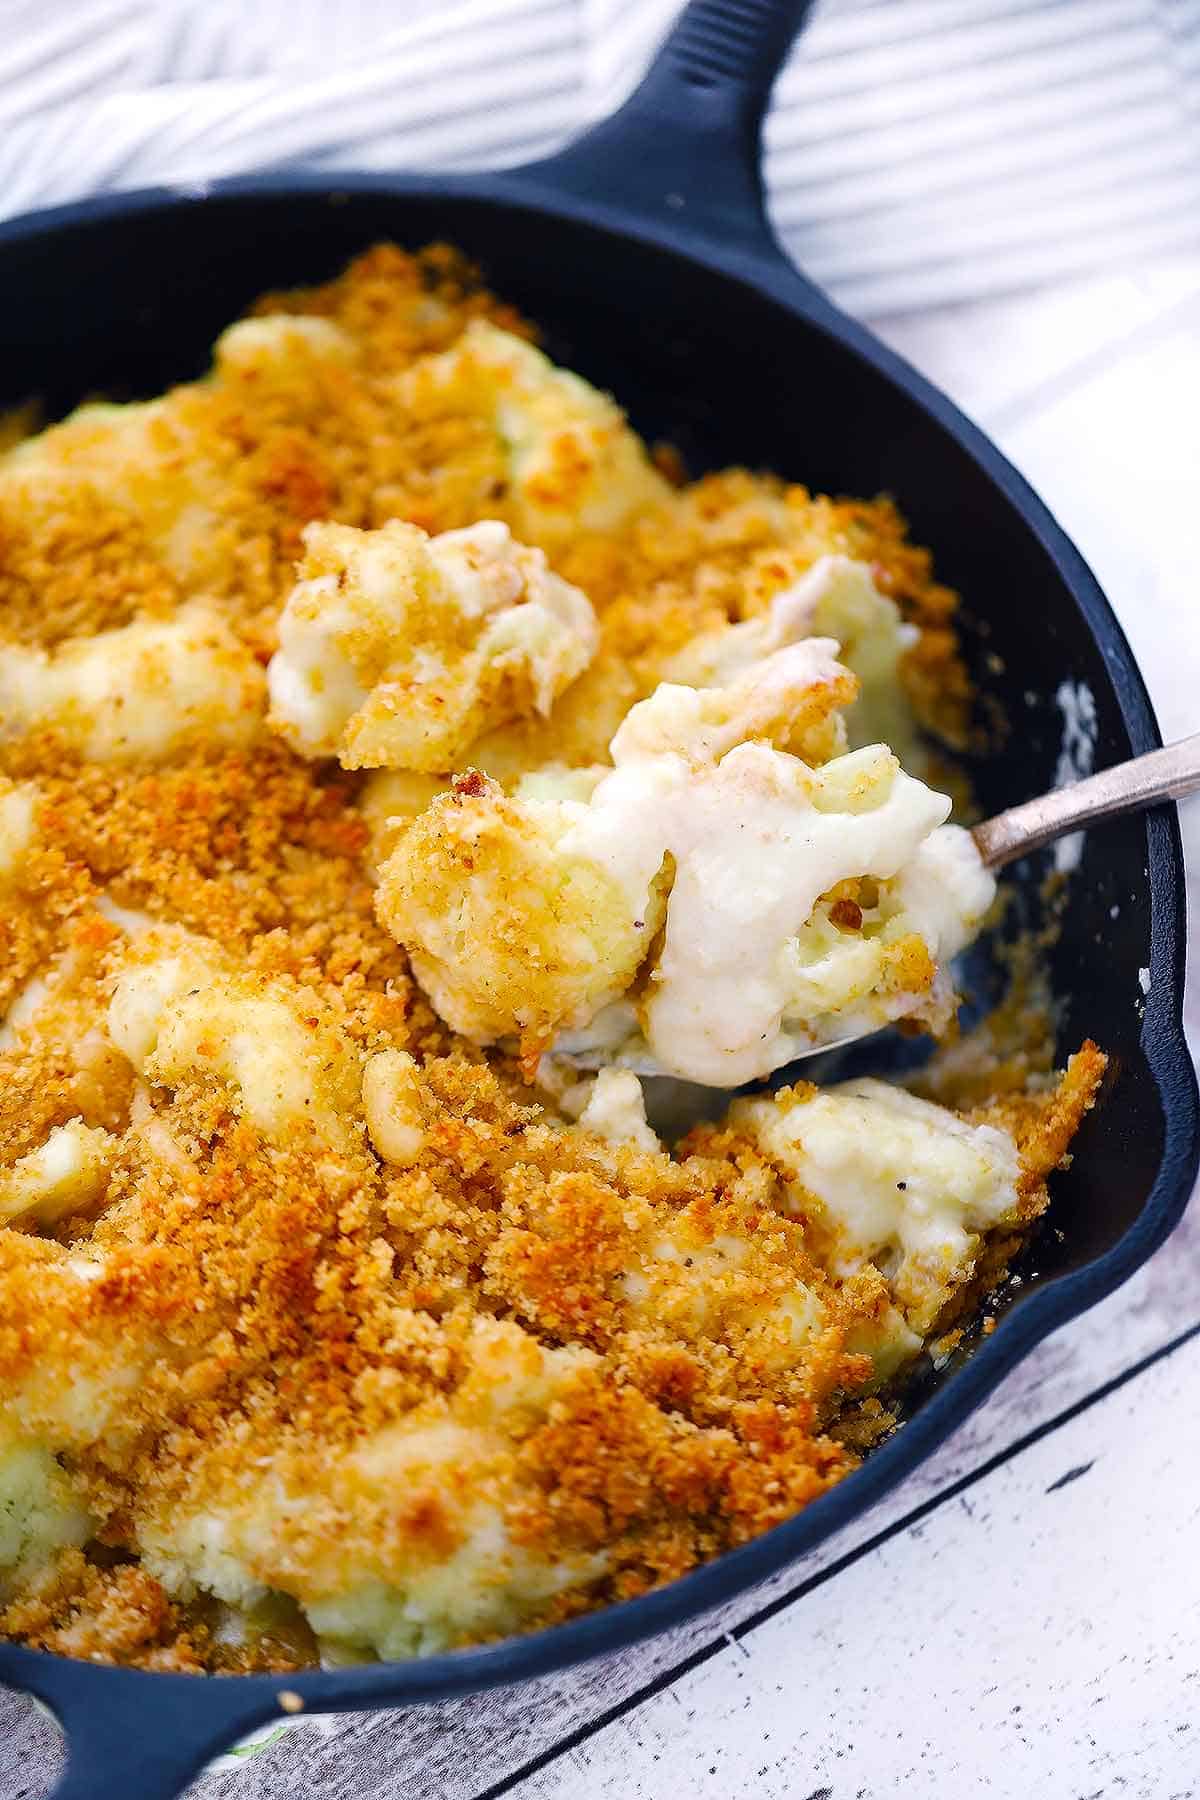 A serving spoon taking a scoop of cauliflower gratin out of a skillet.